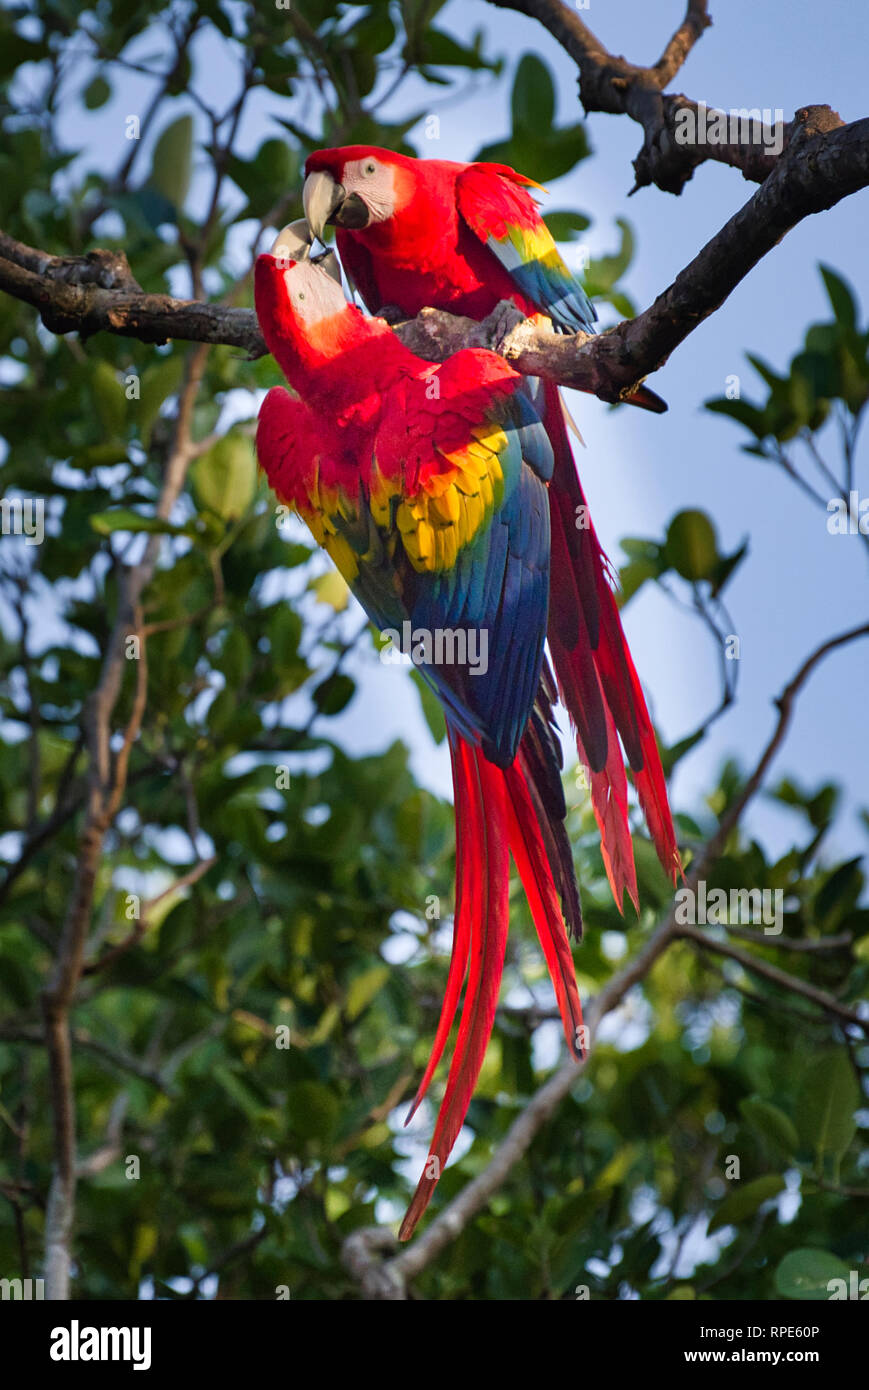 Pair of scarlet macaws, Ara macao these vibrant colored bird images where taken in Panama Stock Photo